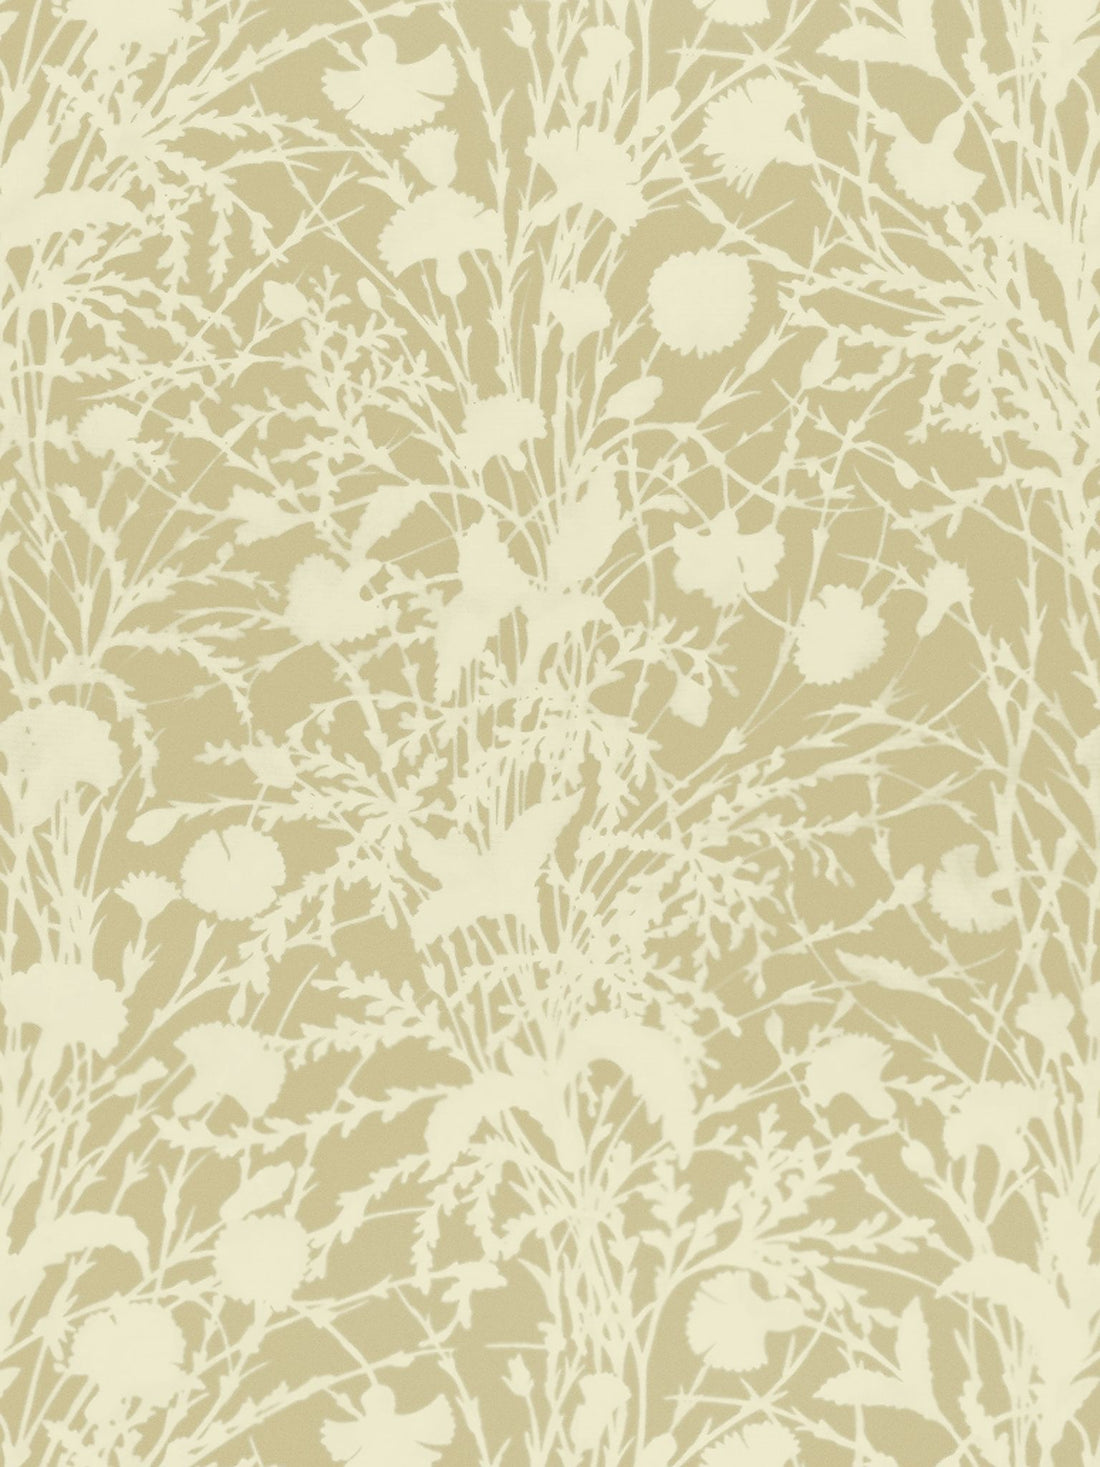 Wildflower fabric in oat color - pattern number GW 000116623 - by Scalamandre in the Grey Watkins collection